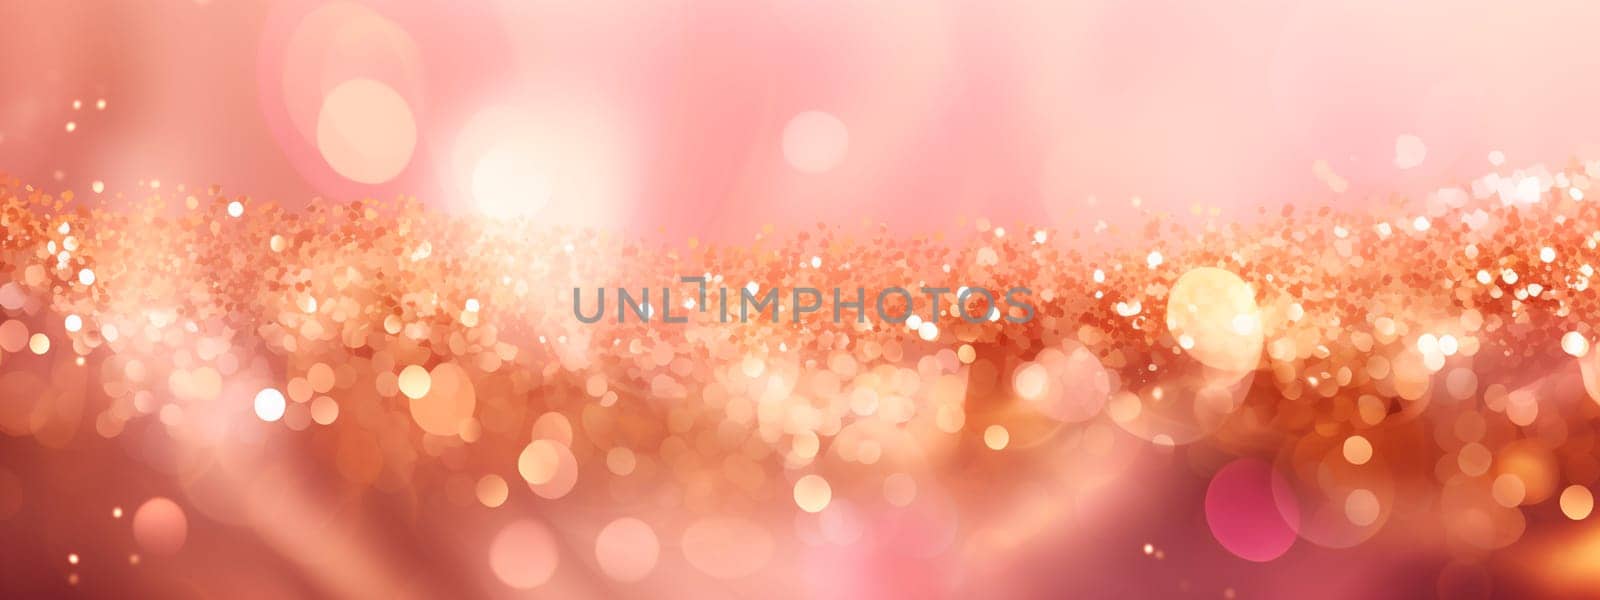 Pink background with sparkles and confetti. Selective focus. by yanadjana